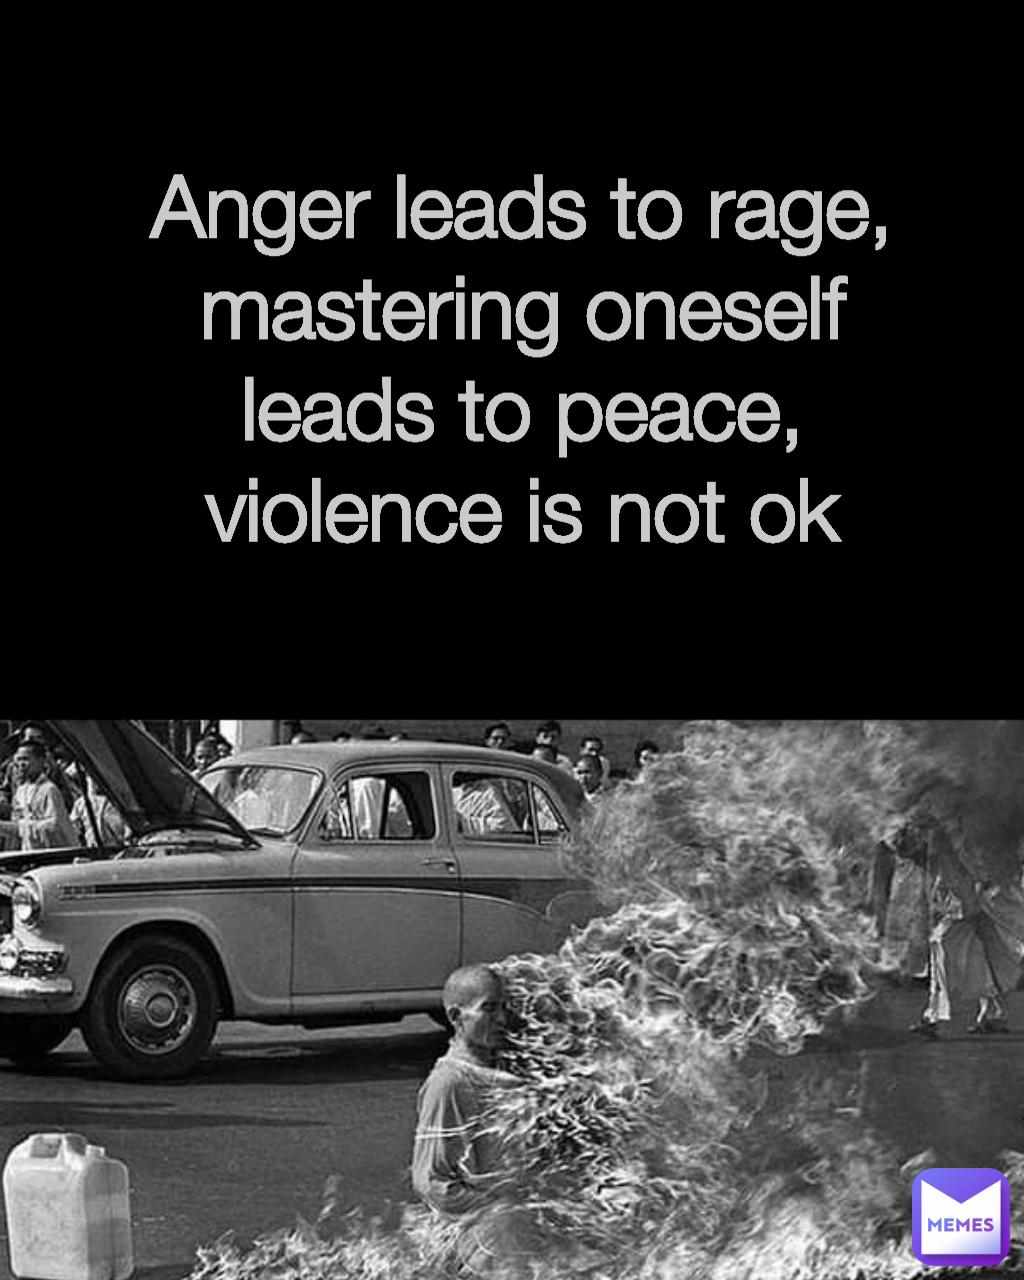 Anger leads to rage,
mastering oneself leads to peace,
violence is not ok